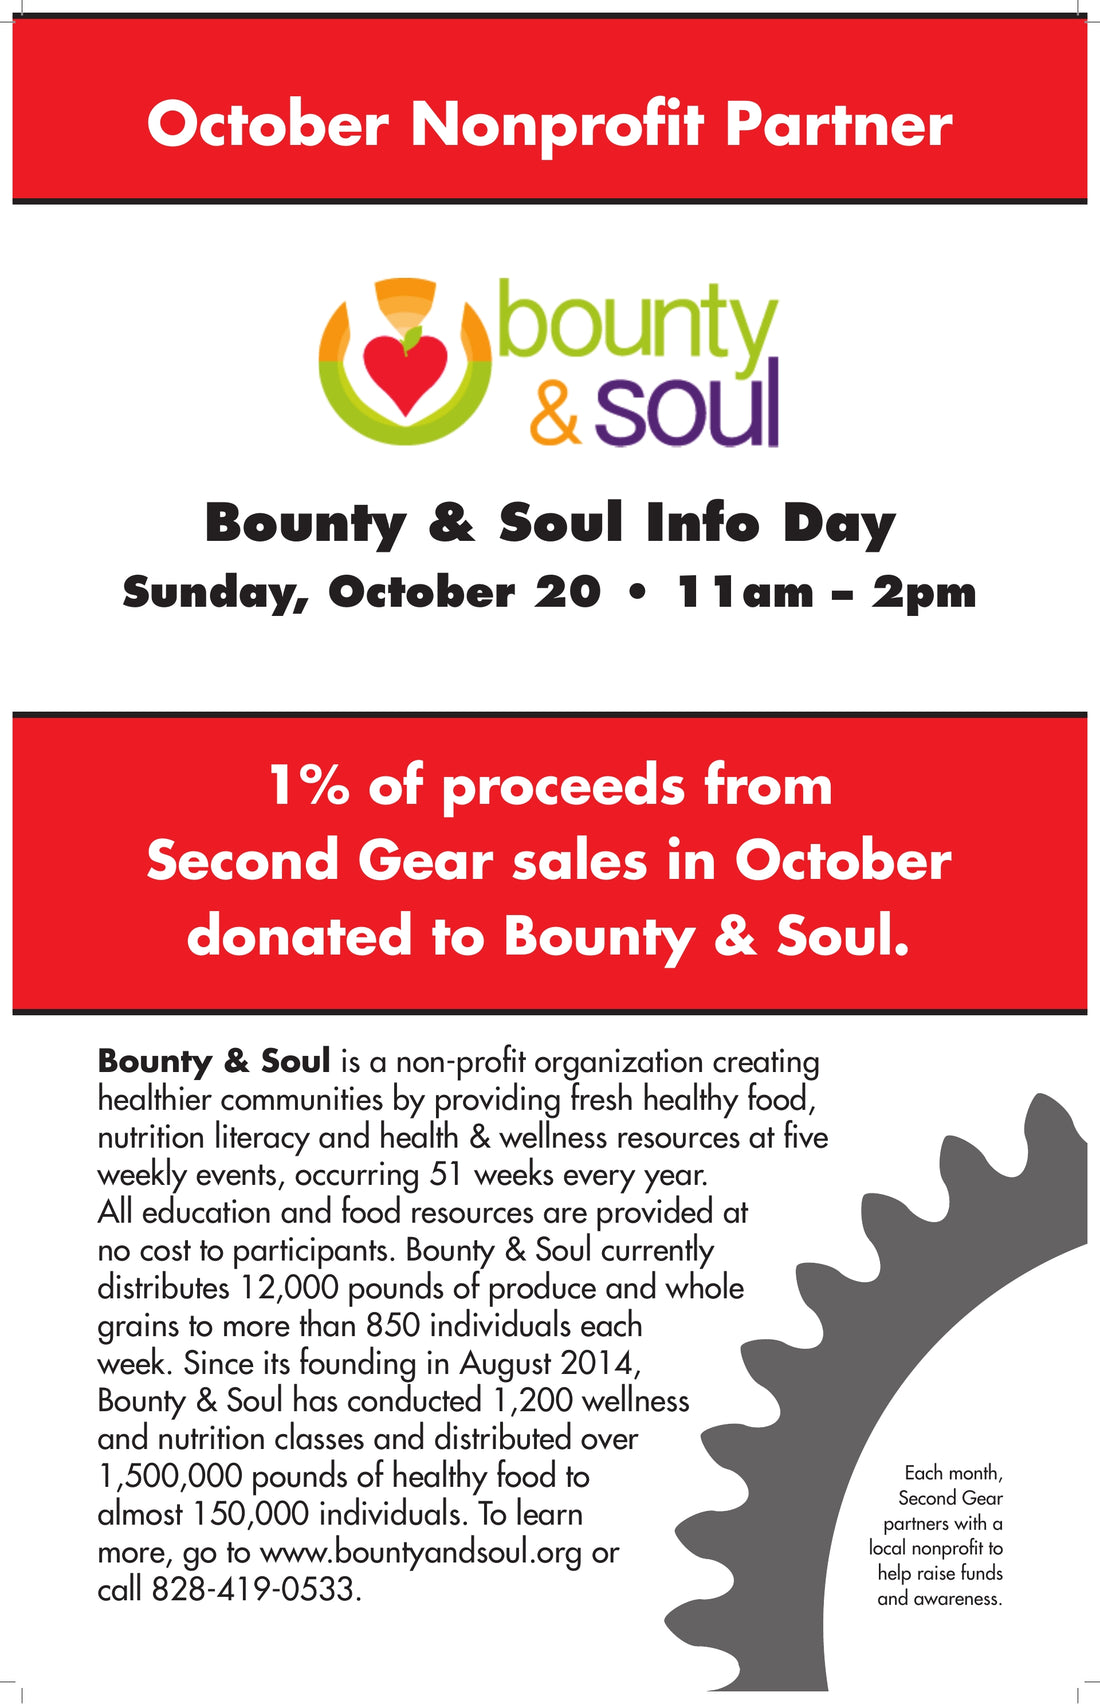 Celebrate Bounty and Soul with Second Gear Sunday, October 20th